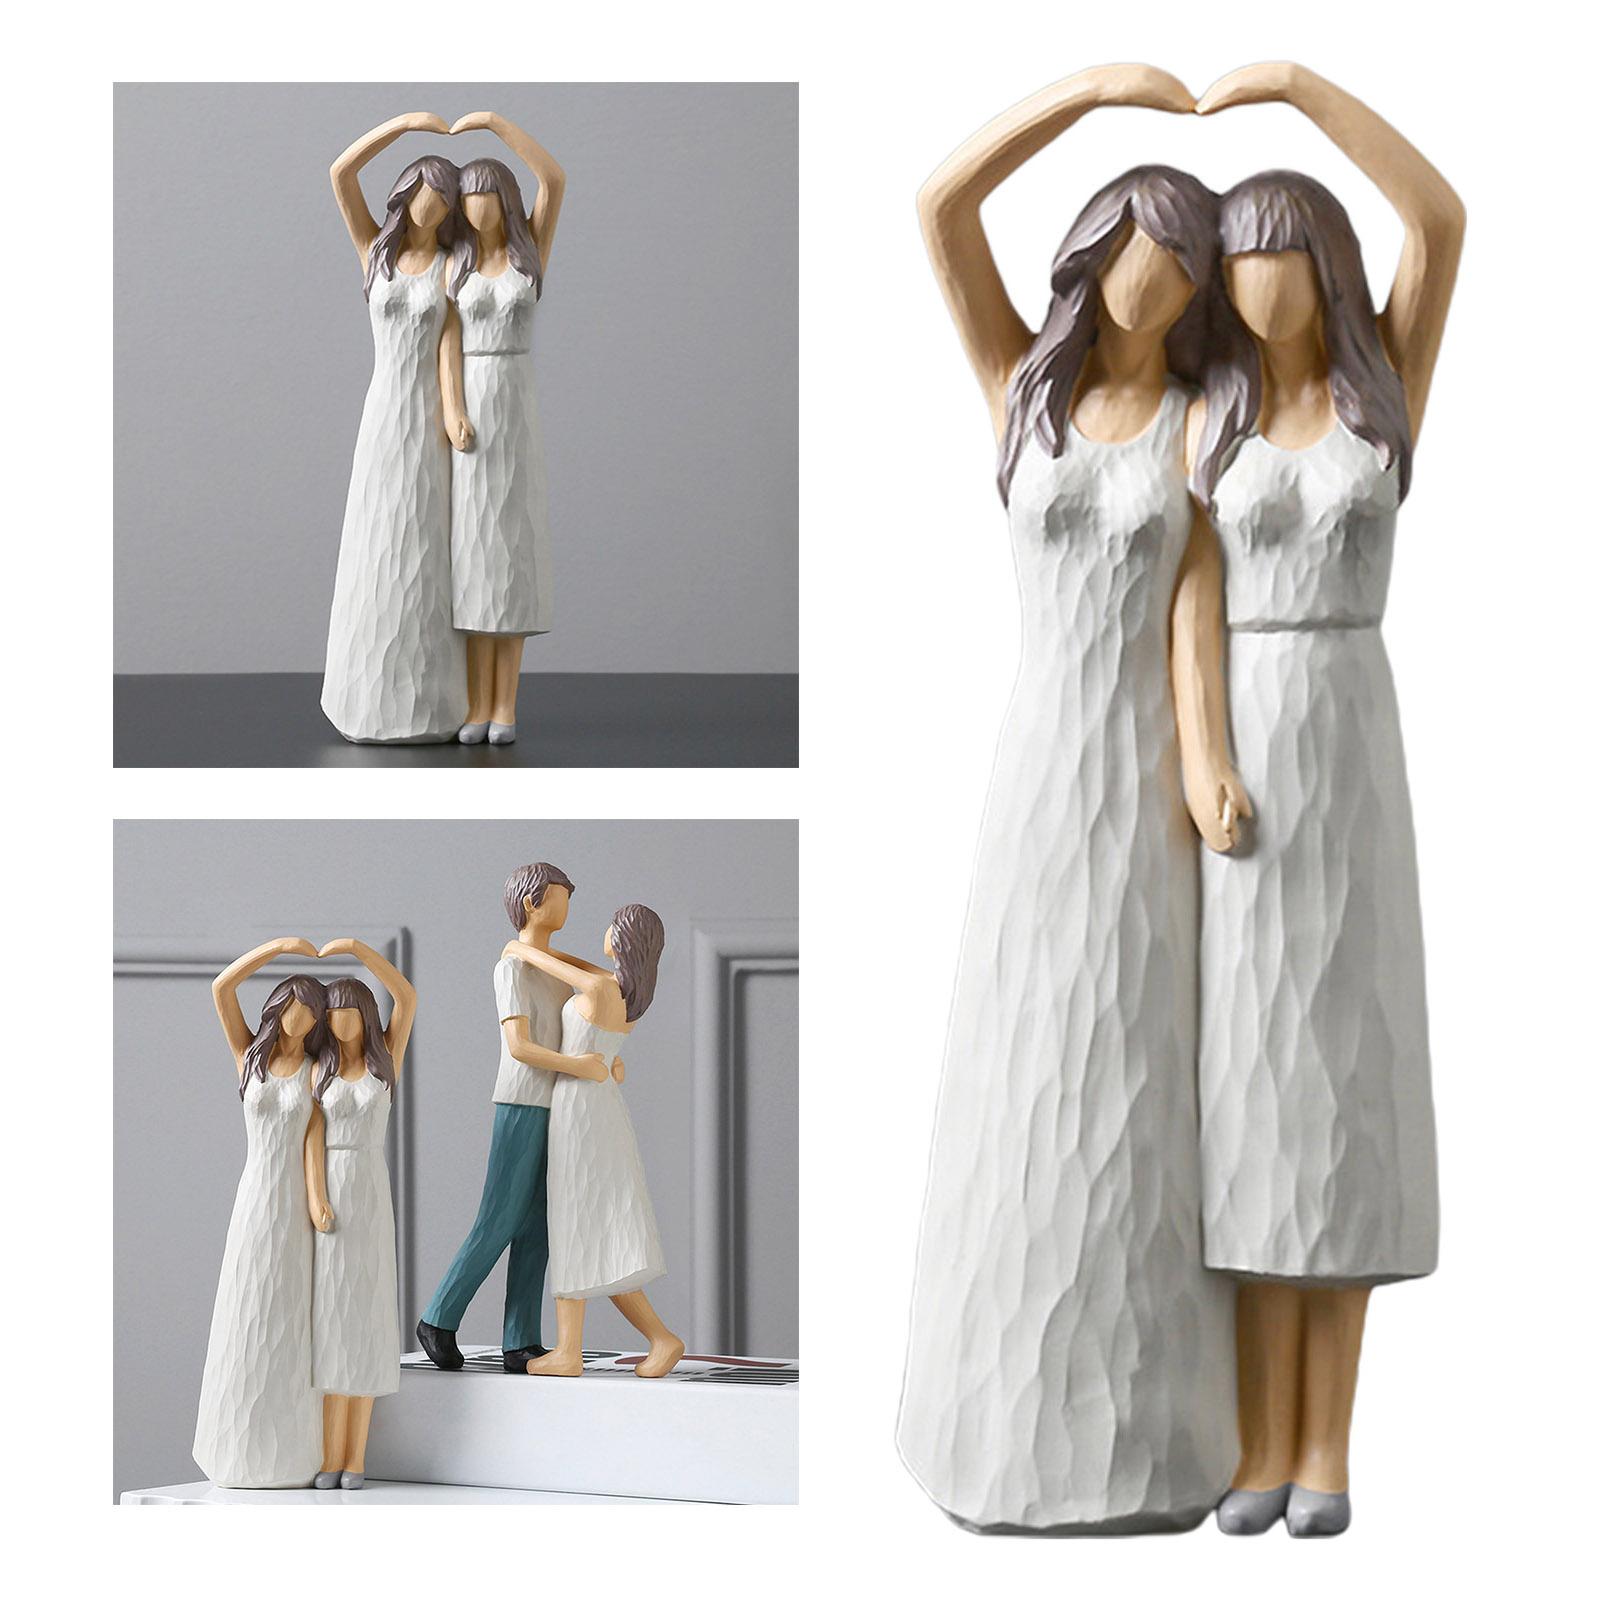 Resin Craft Figurines Family Member Statue Sculptures Sisters